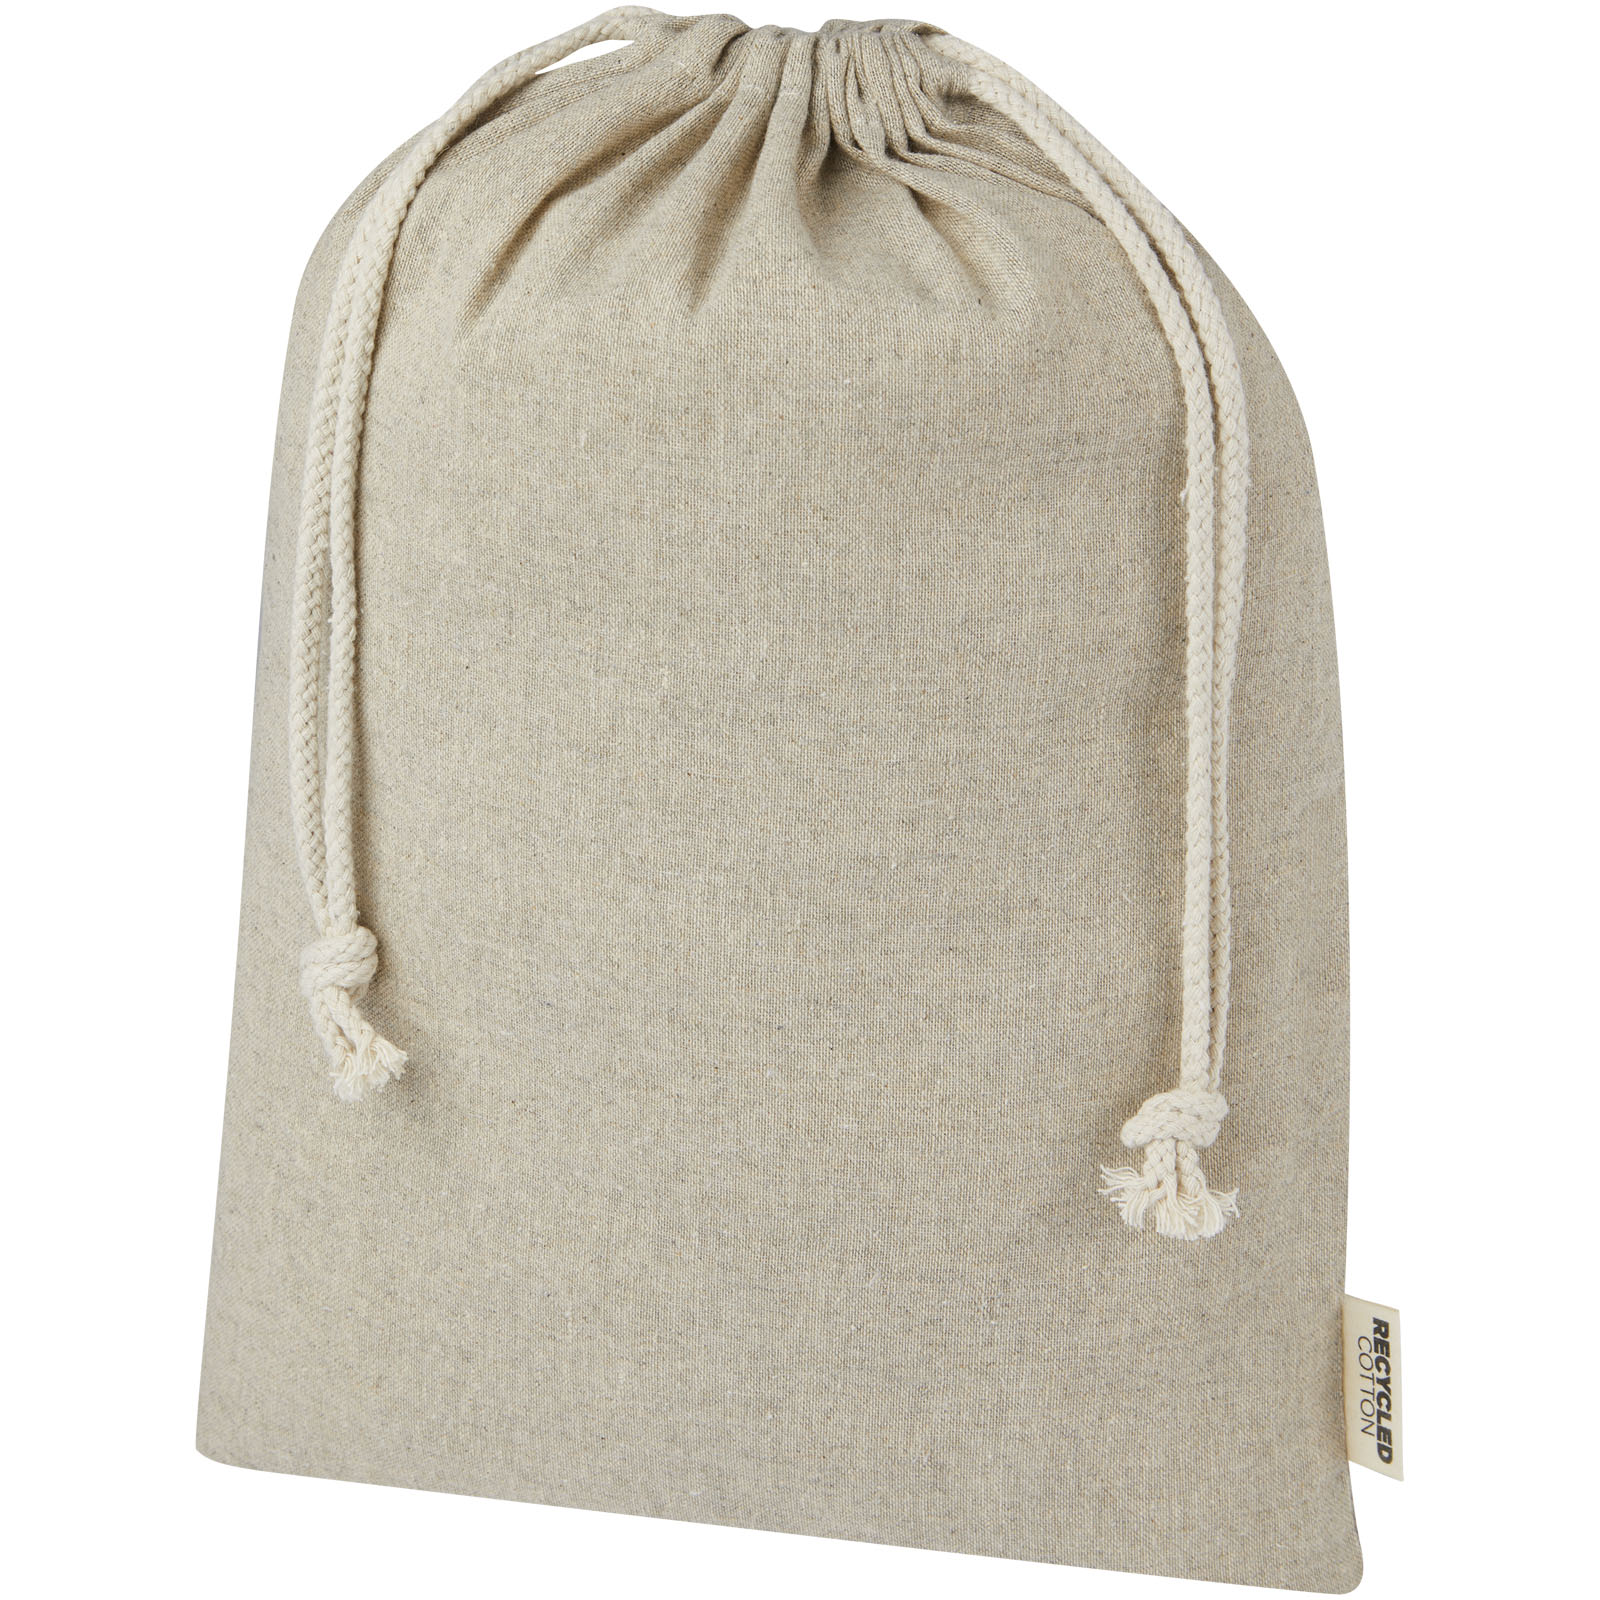 Cotton Bags - Pheebs 150 g/m² GRS recycled cotton gift bag large 4L